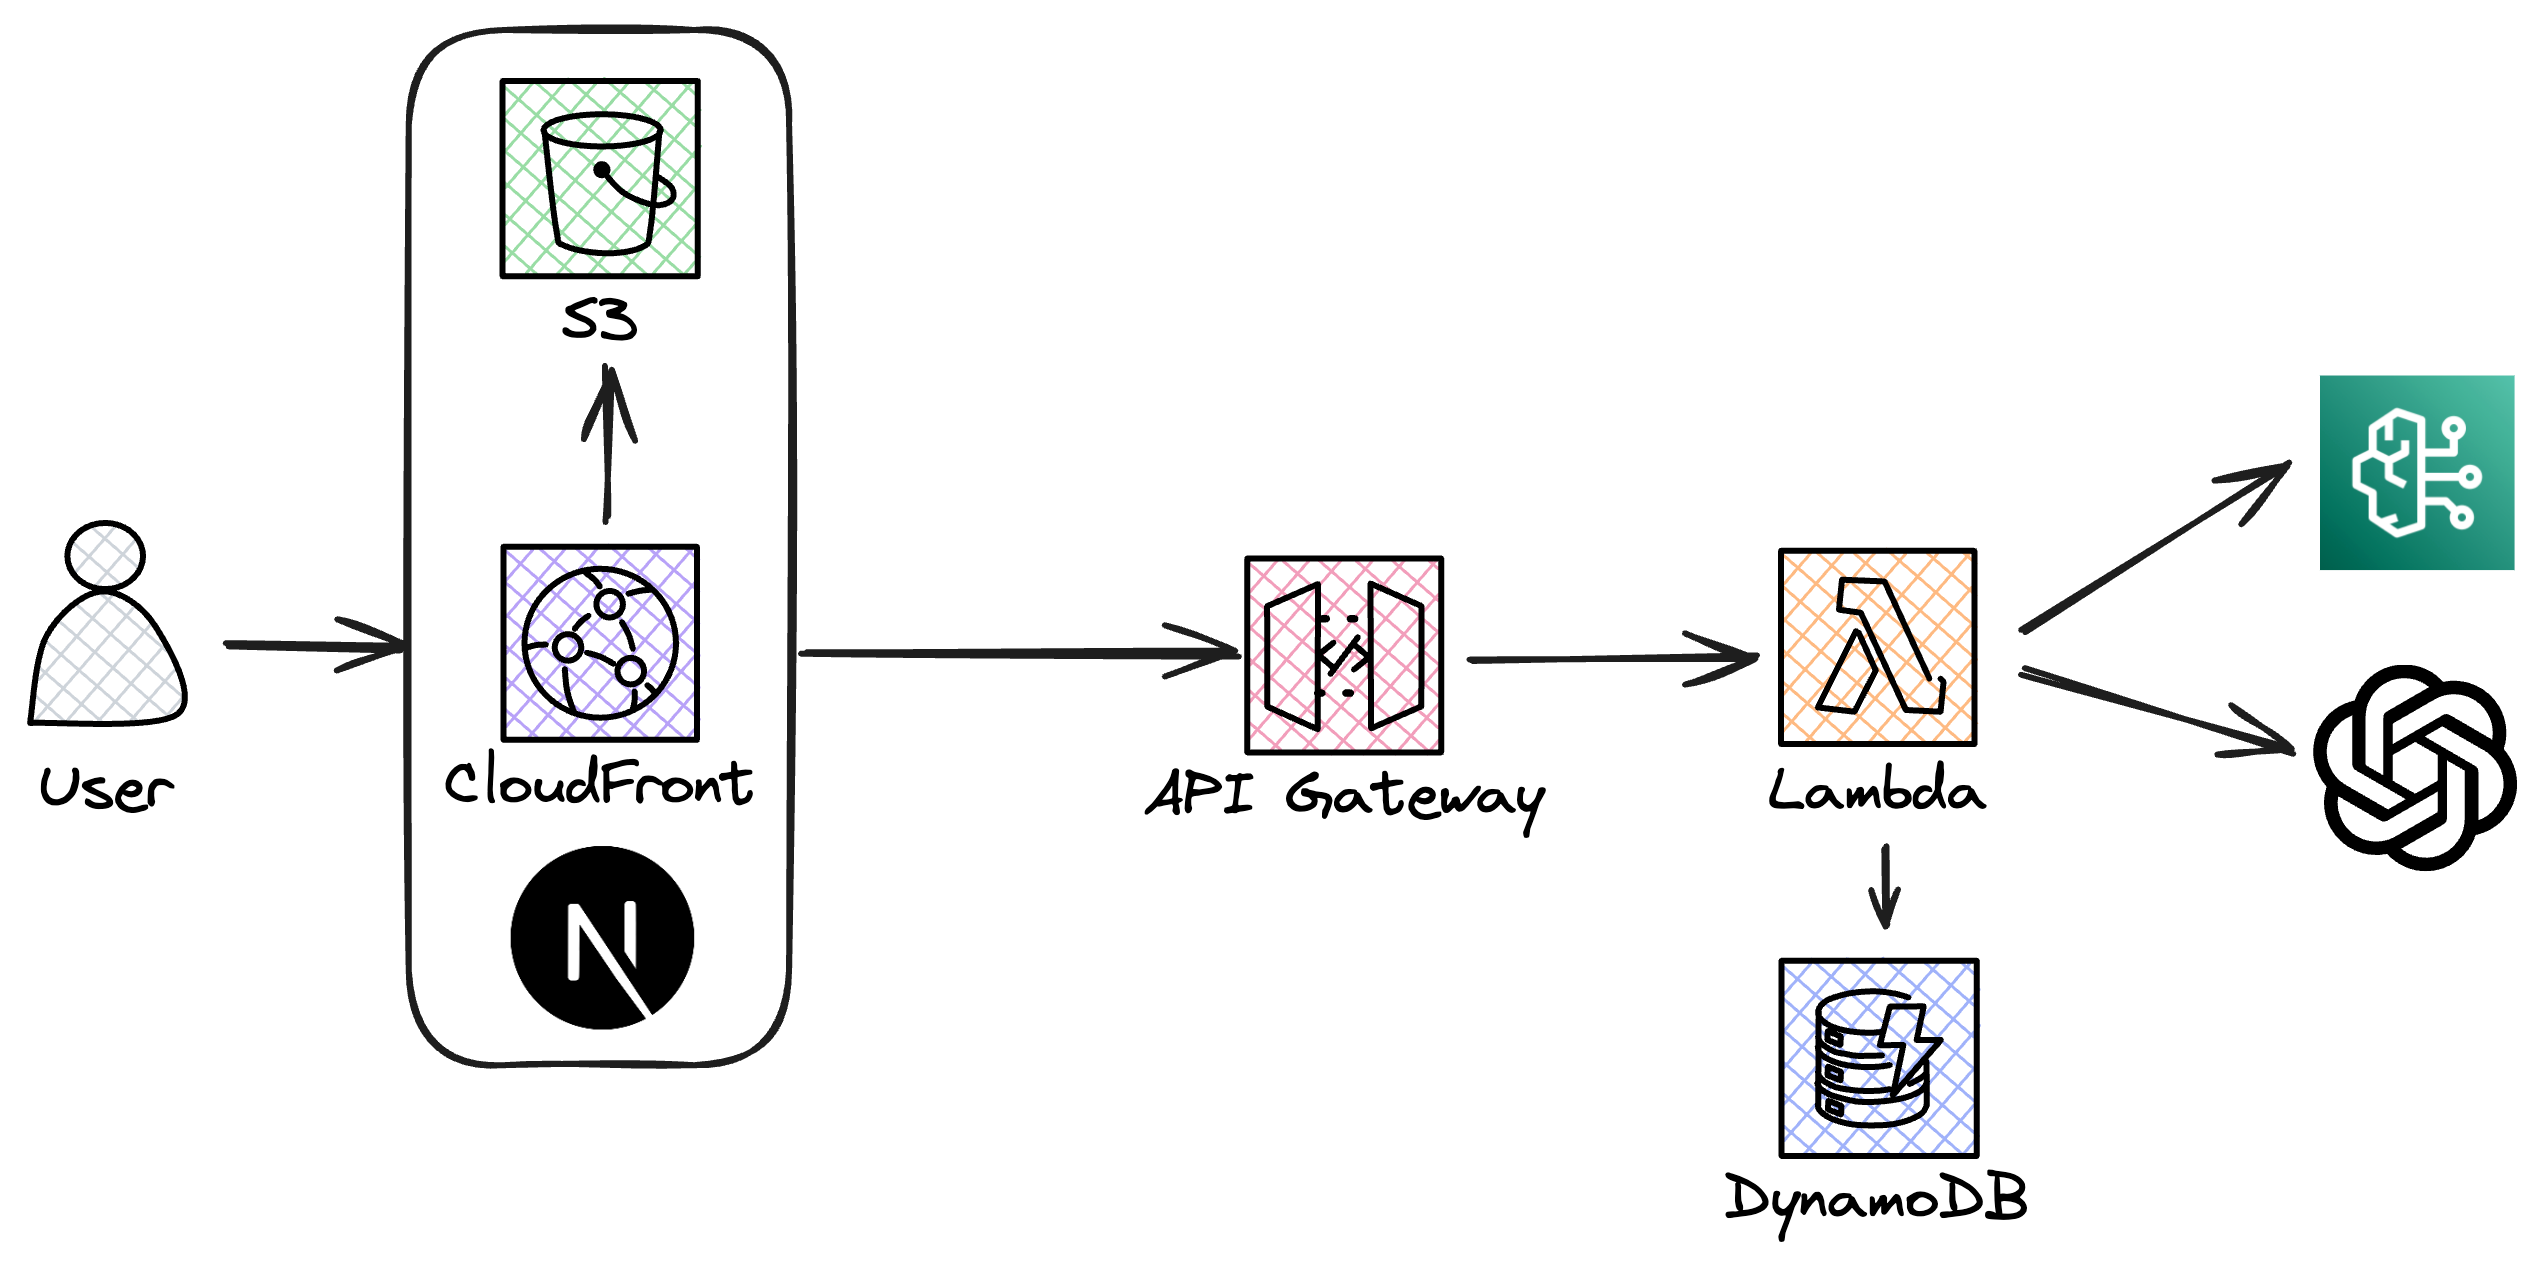 Architecture Diagram of our application